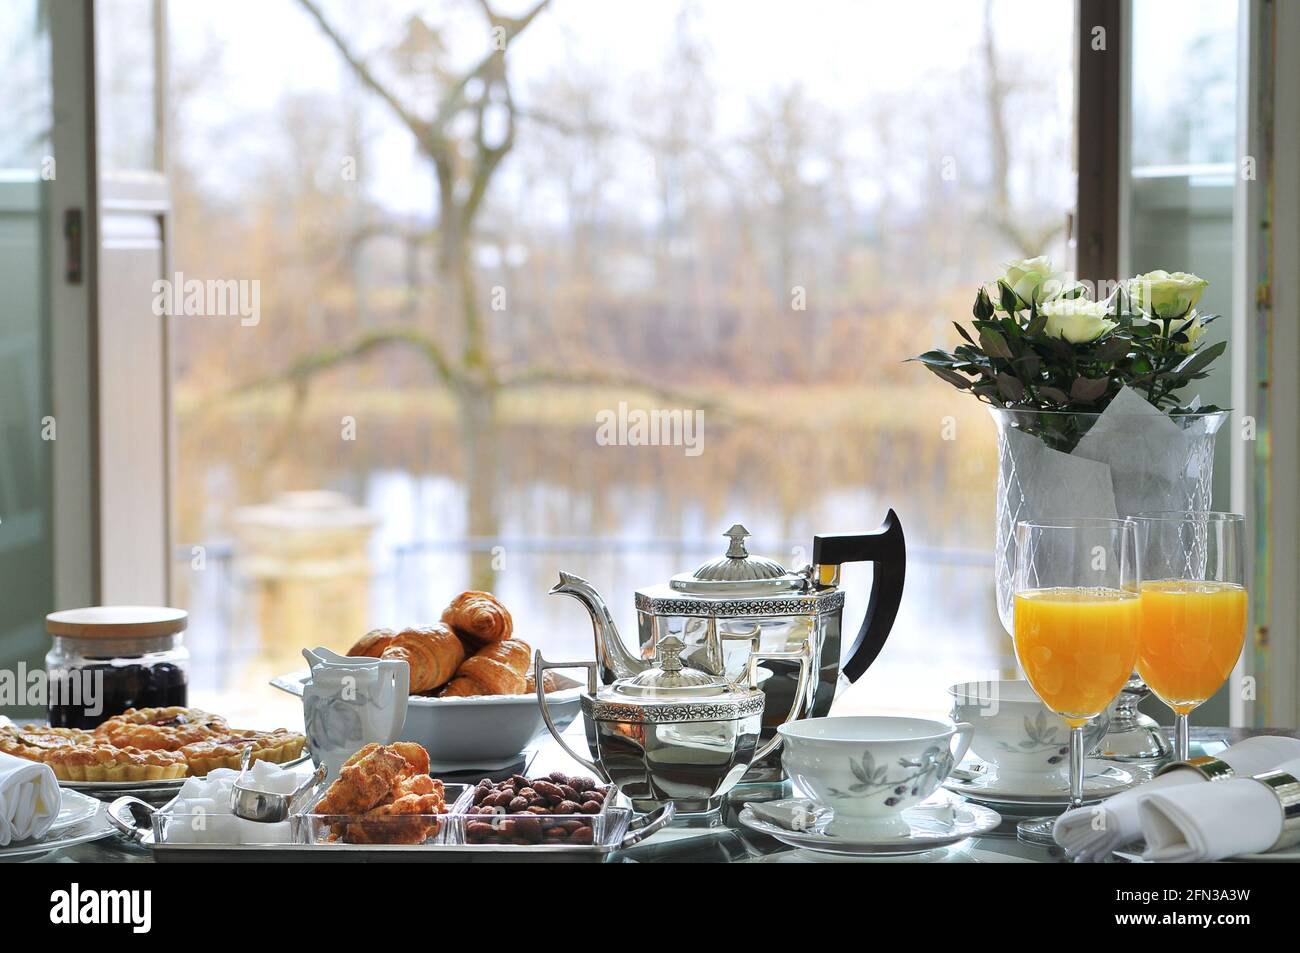 Rich breakfast serving on table with croissants, almonds, orrange juice and other pastry silverware autumn morning light Stock Photo